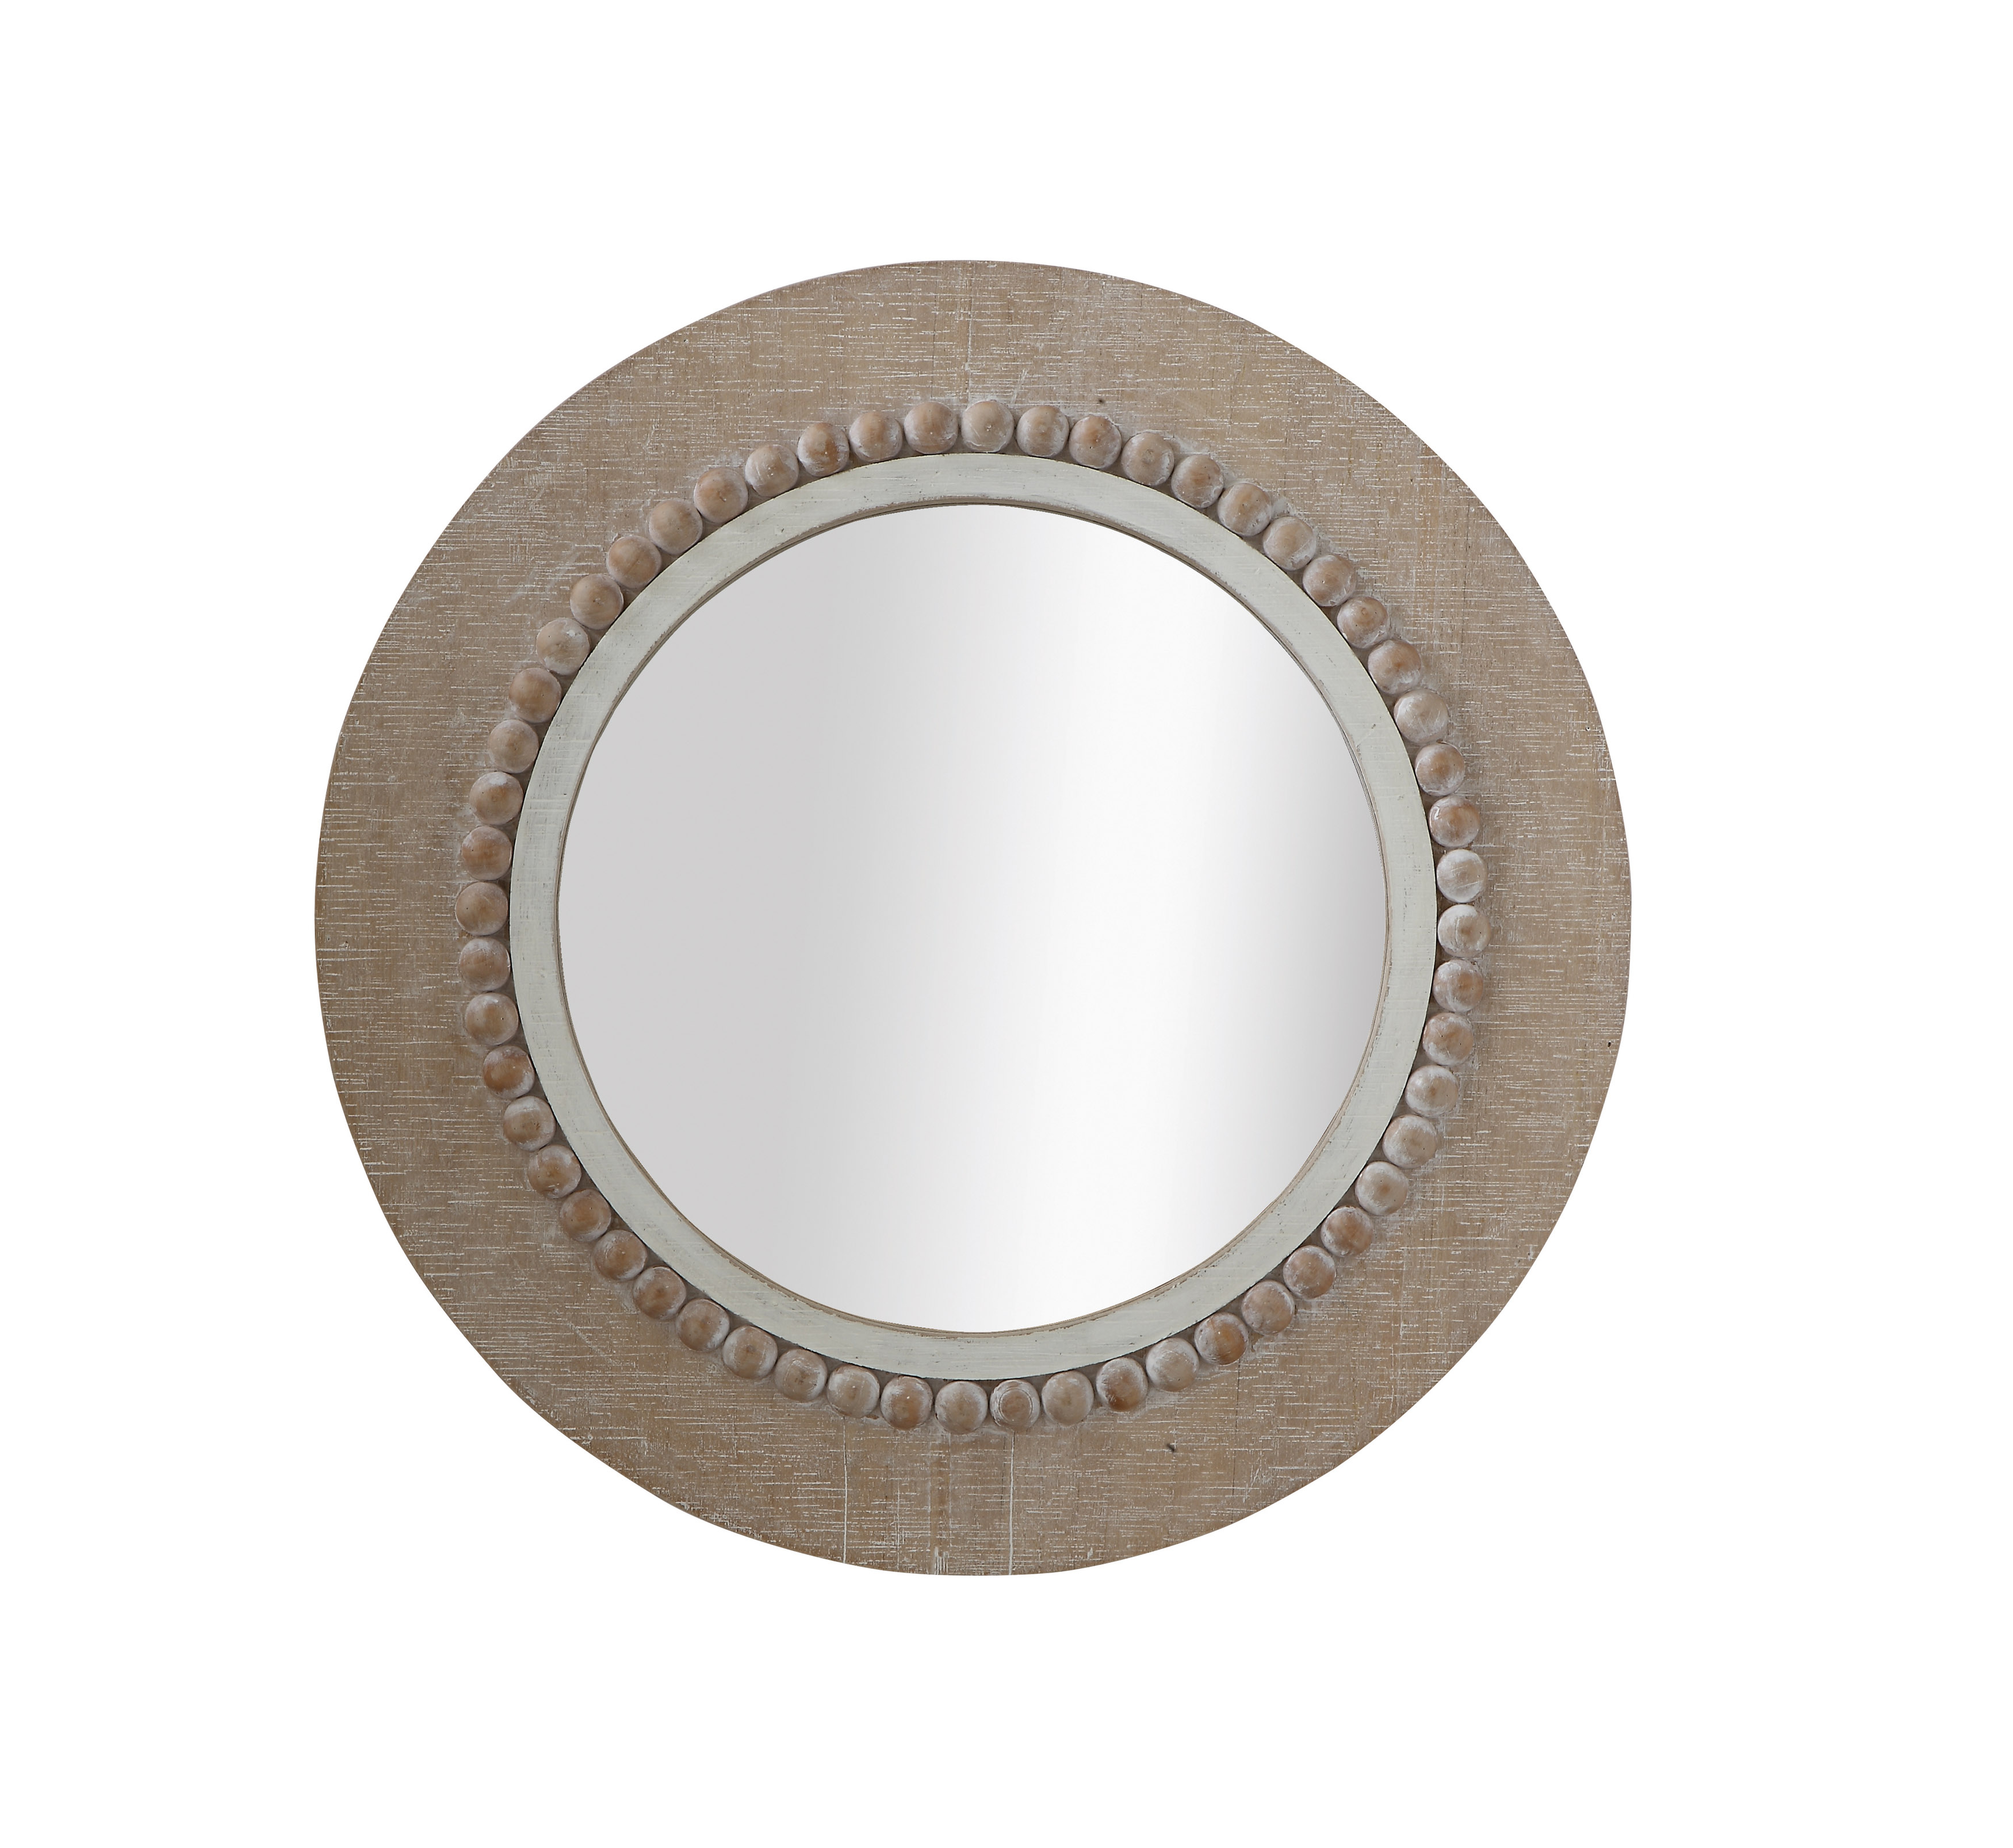 Round Decorative Wood Wall Mirror - Creative Co-Op